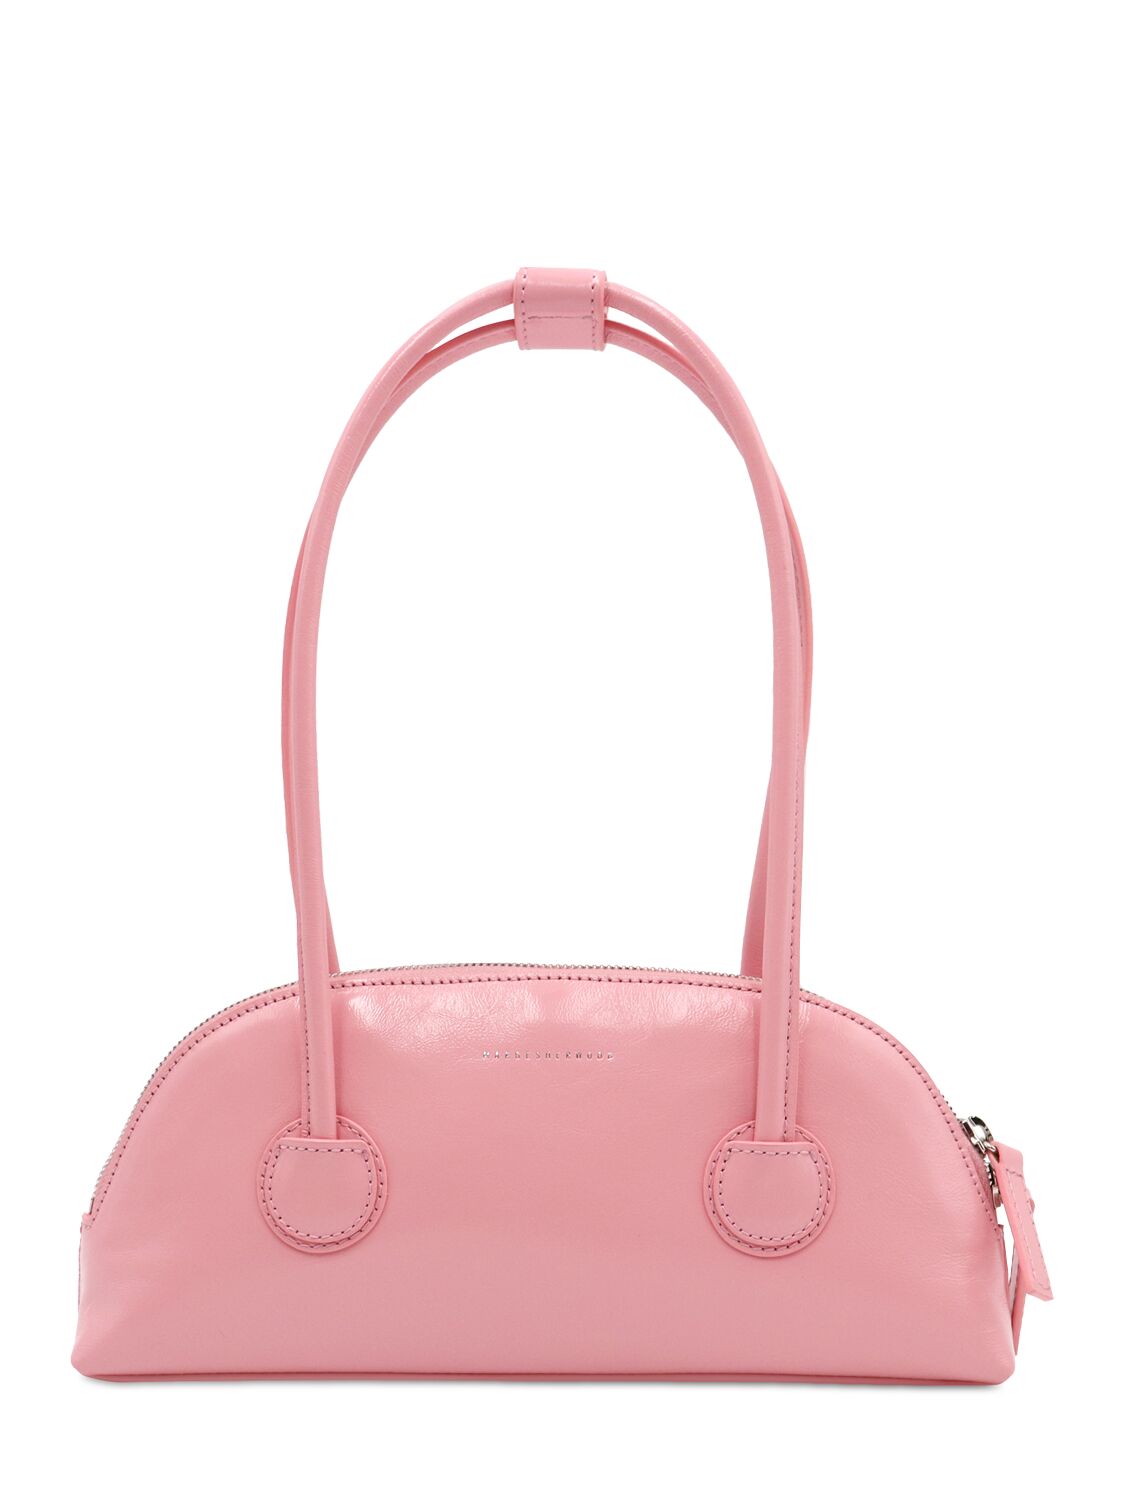 Marge Sherwood Bessette Leather Shoulder Bag In Candy Pink Glossy